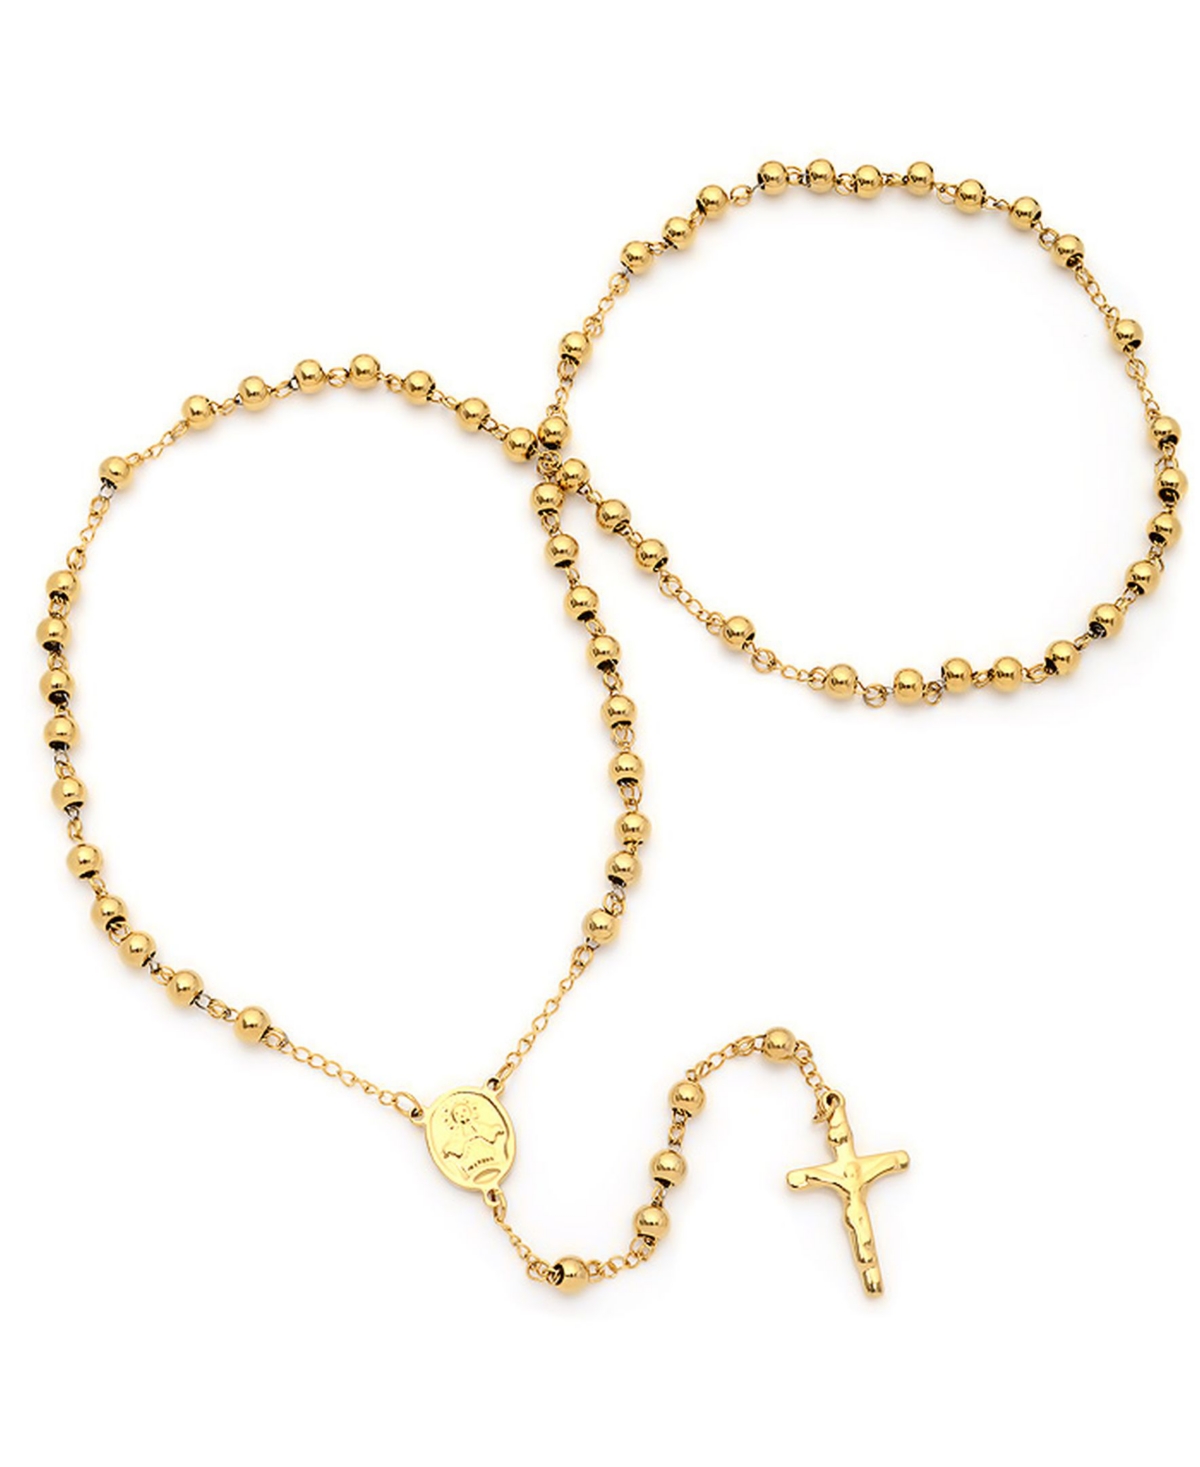 Shop Steeltime Women's 18k Gold Plated Rosary Necklace